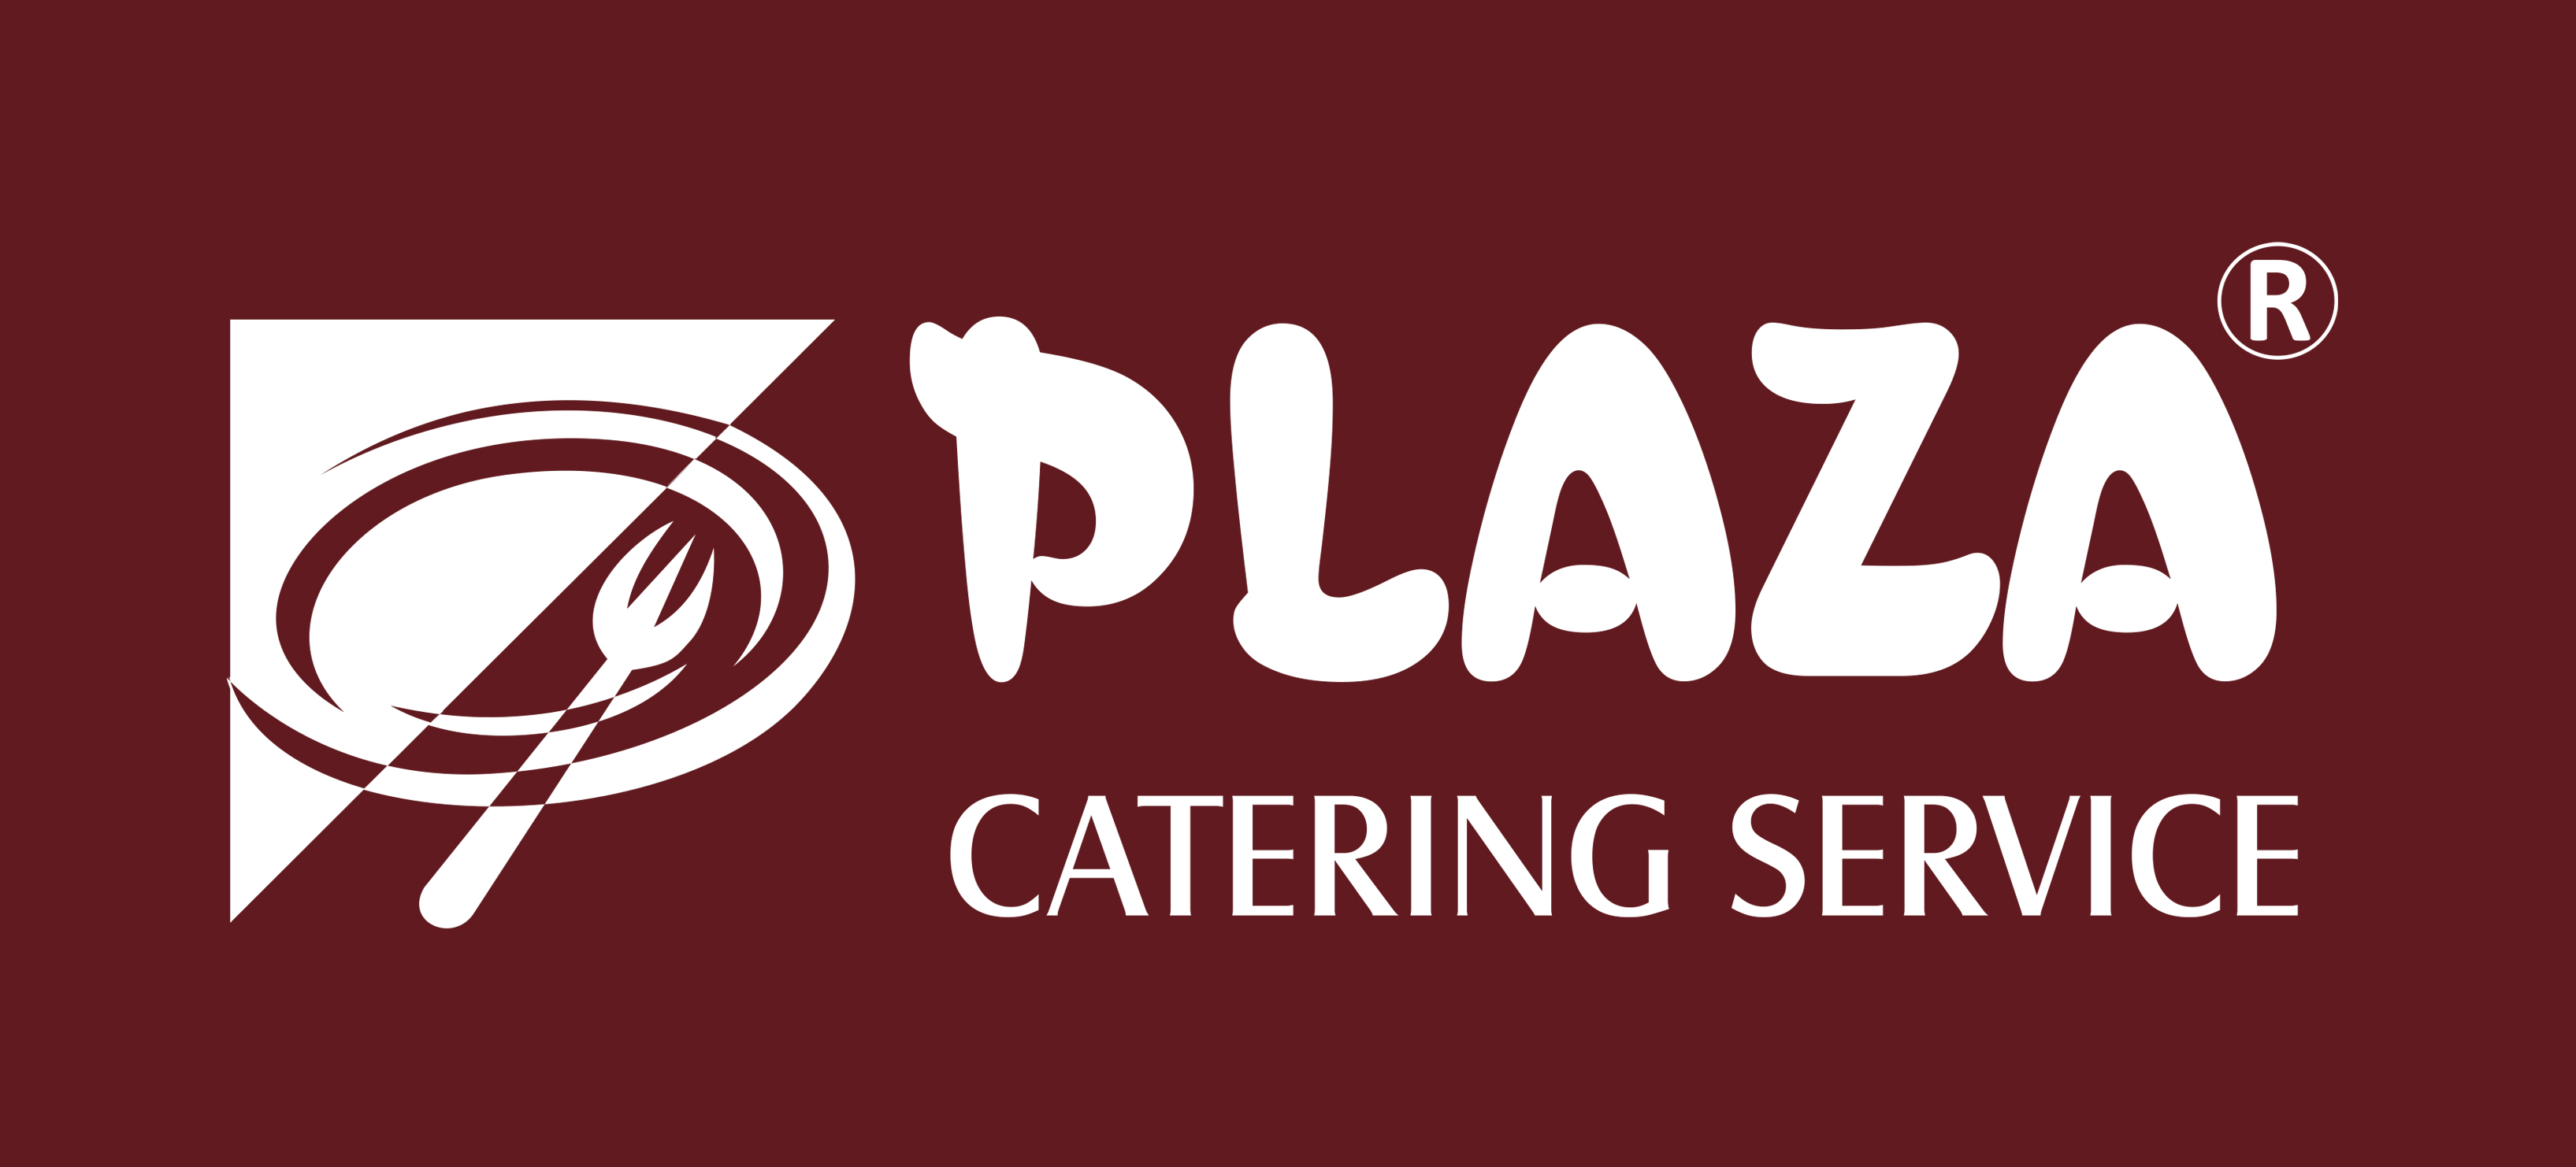 Plaza Catering